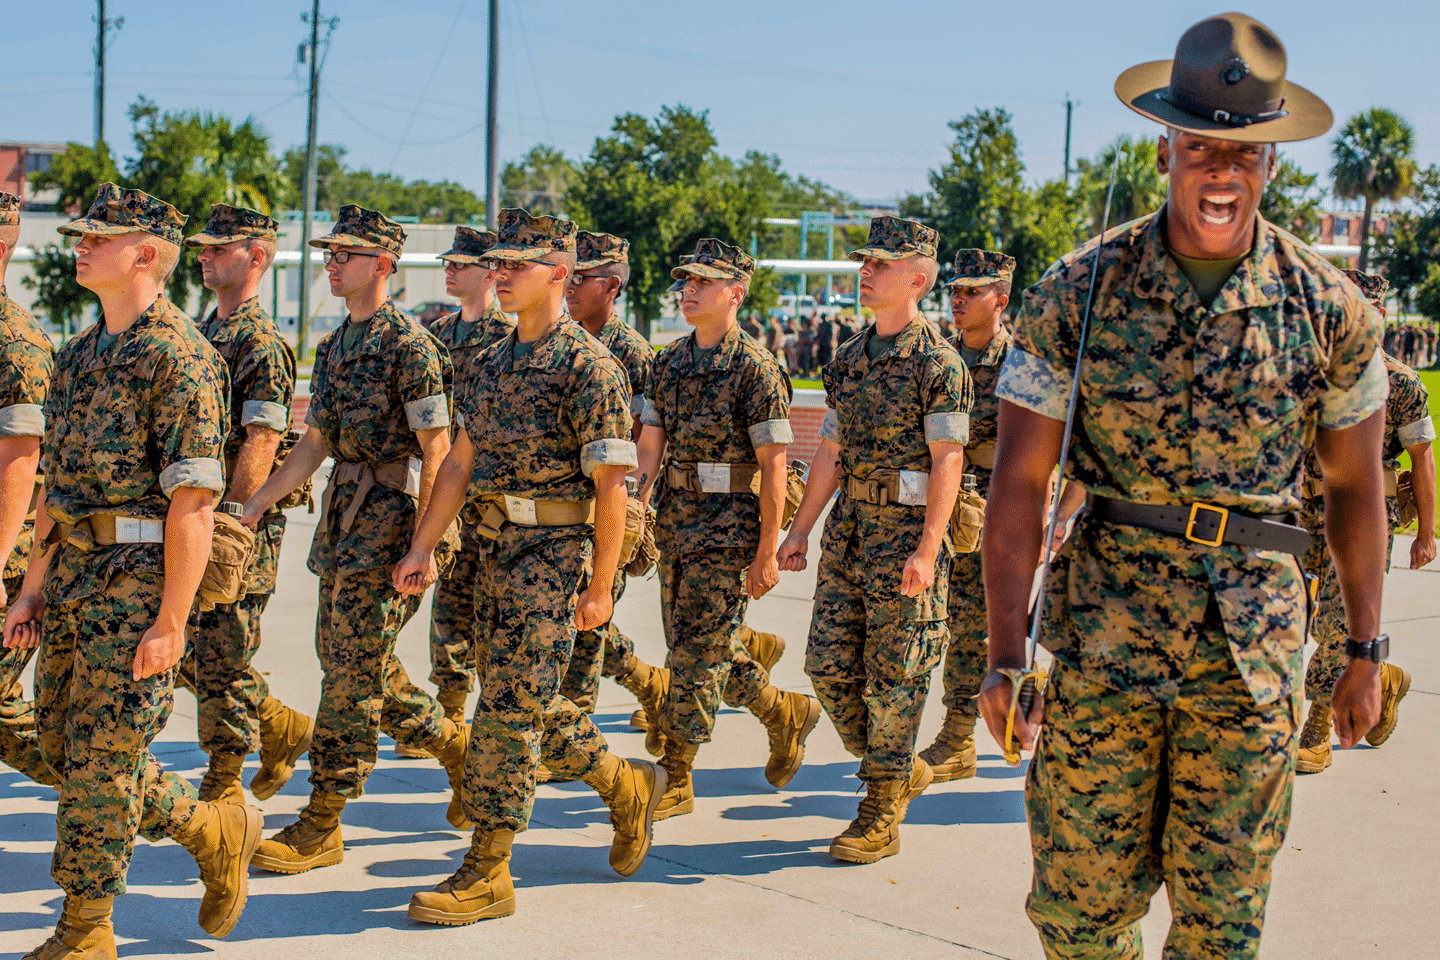 Marine corps bootcamps